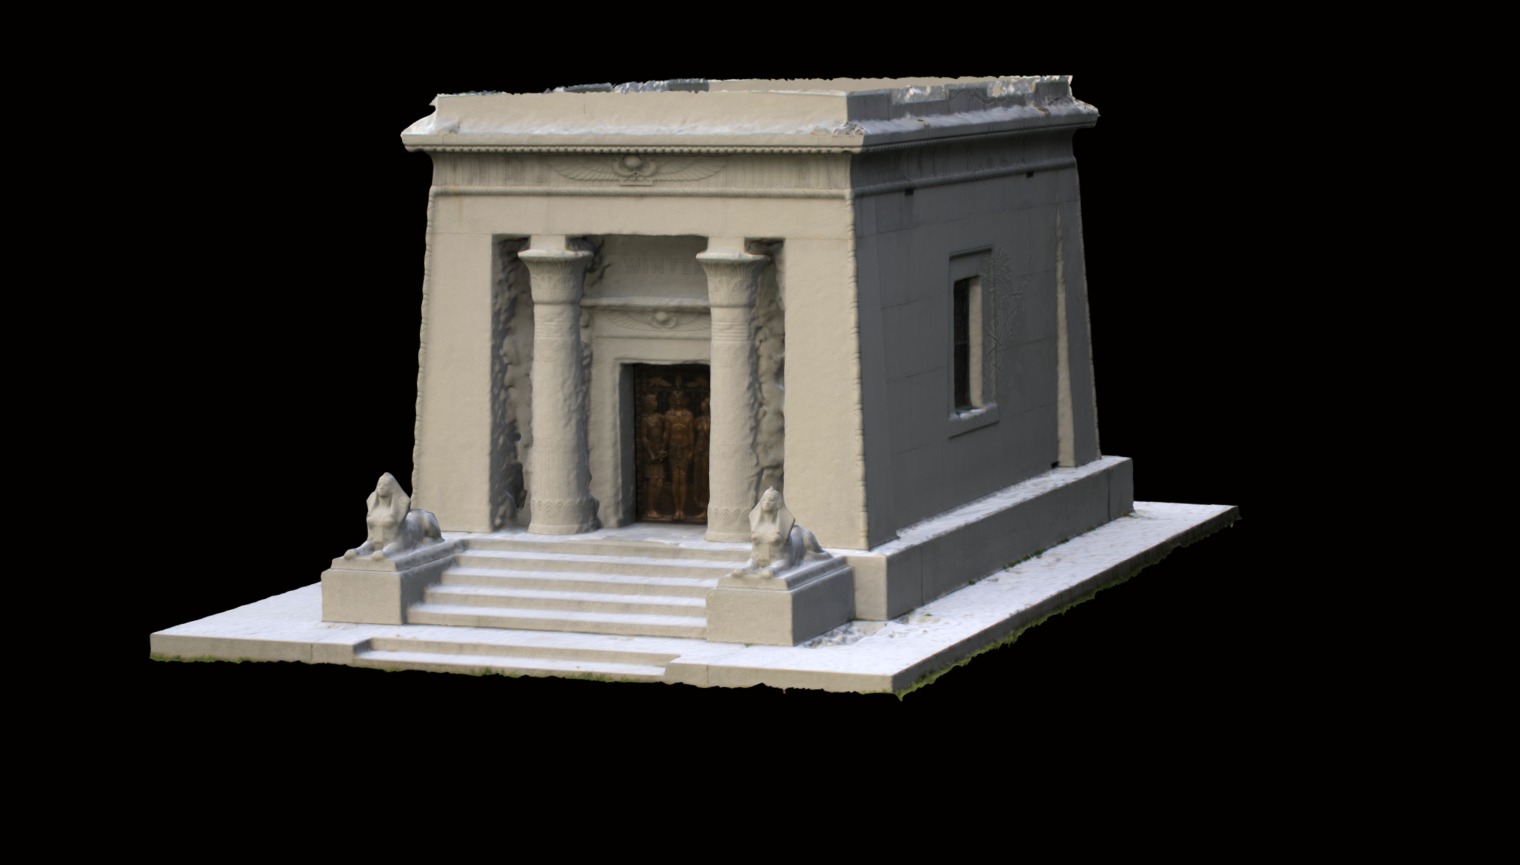 This is the Egyptian Revival Style mausoleum of Emil Winter in Pittsburgh's Allegheny Cemetery.  The model was created using Agisoft's Photoscan Pro from 80, 18MP images taken on July 19, 2015 using a Canon EOS Rebel T3i and a 18-55mm lens. Still a work in progress with additional detail to add and geometry to fix.

The mausoleum was built in 1930 and is a nearly exact duplicate of the one designed by John Russell Pope in 1920 and built for department store mogul F. W. Woolworth in Woodlawn Cemetery in New York.
https://alleghenycemetery.com/content.php?cat=genealogy&amp;page=mausoleums&amp;mode=detail&amp;id=15137

For a detailed model of the left sphinx, see https://skfb.ly/FNPM

If you ever have the opportunity to visit Pittsburgh, Allegheny Cemetery is an absolute must see.  It is one of the truly magnificent Landscape cemeteries in America 3d model